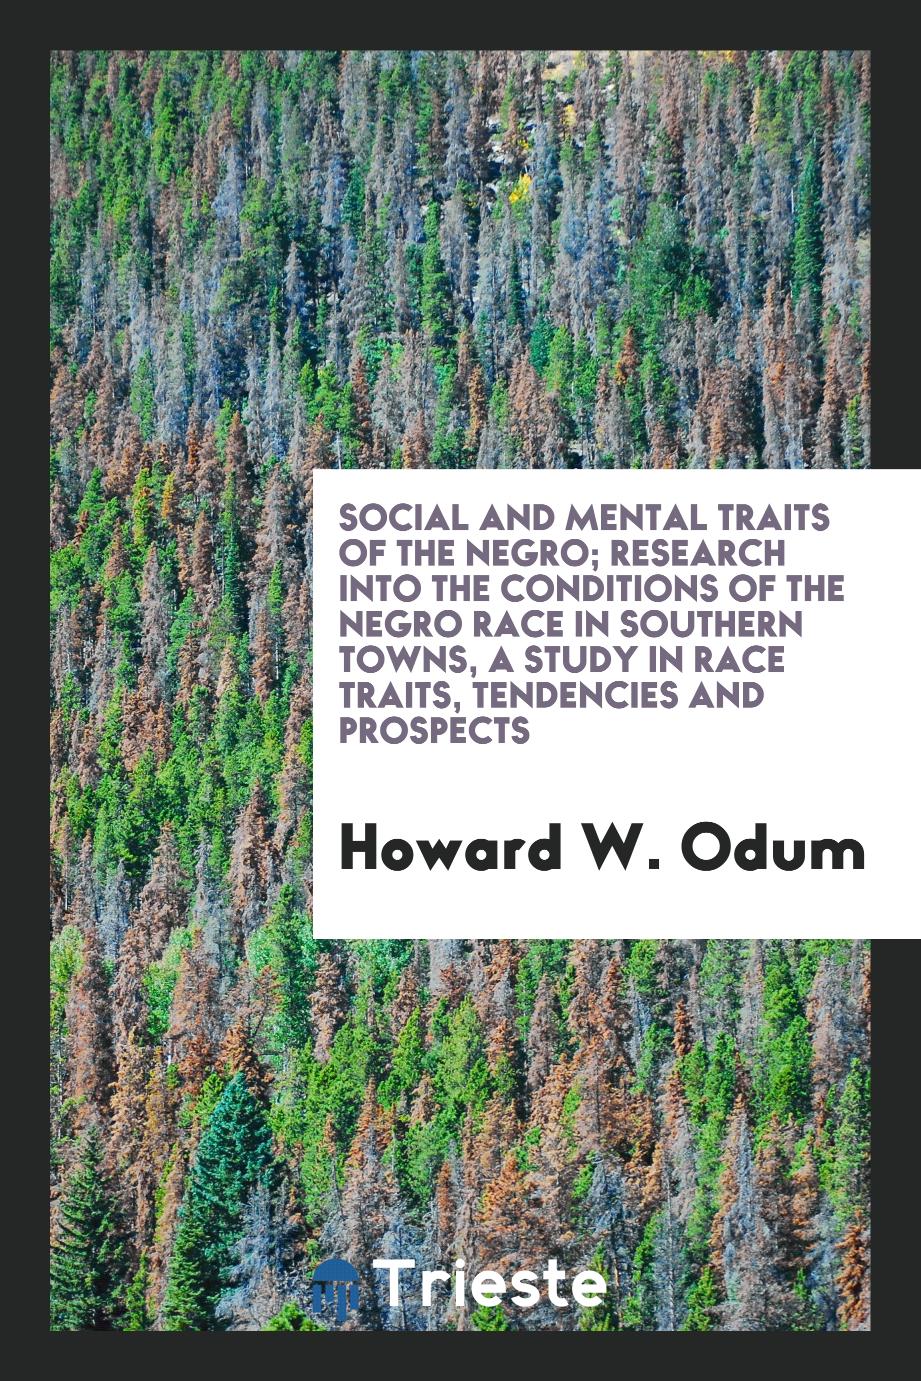 Social and Mental Traits of the Negro; Research into the Conditions of the Negro Race in Southern Towns, a Study in Race Traits, Tendencies and Prospects